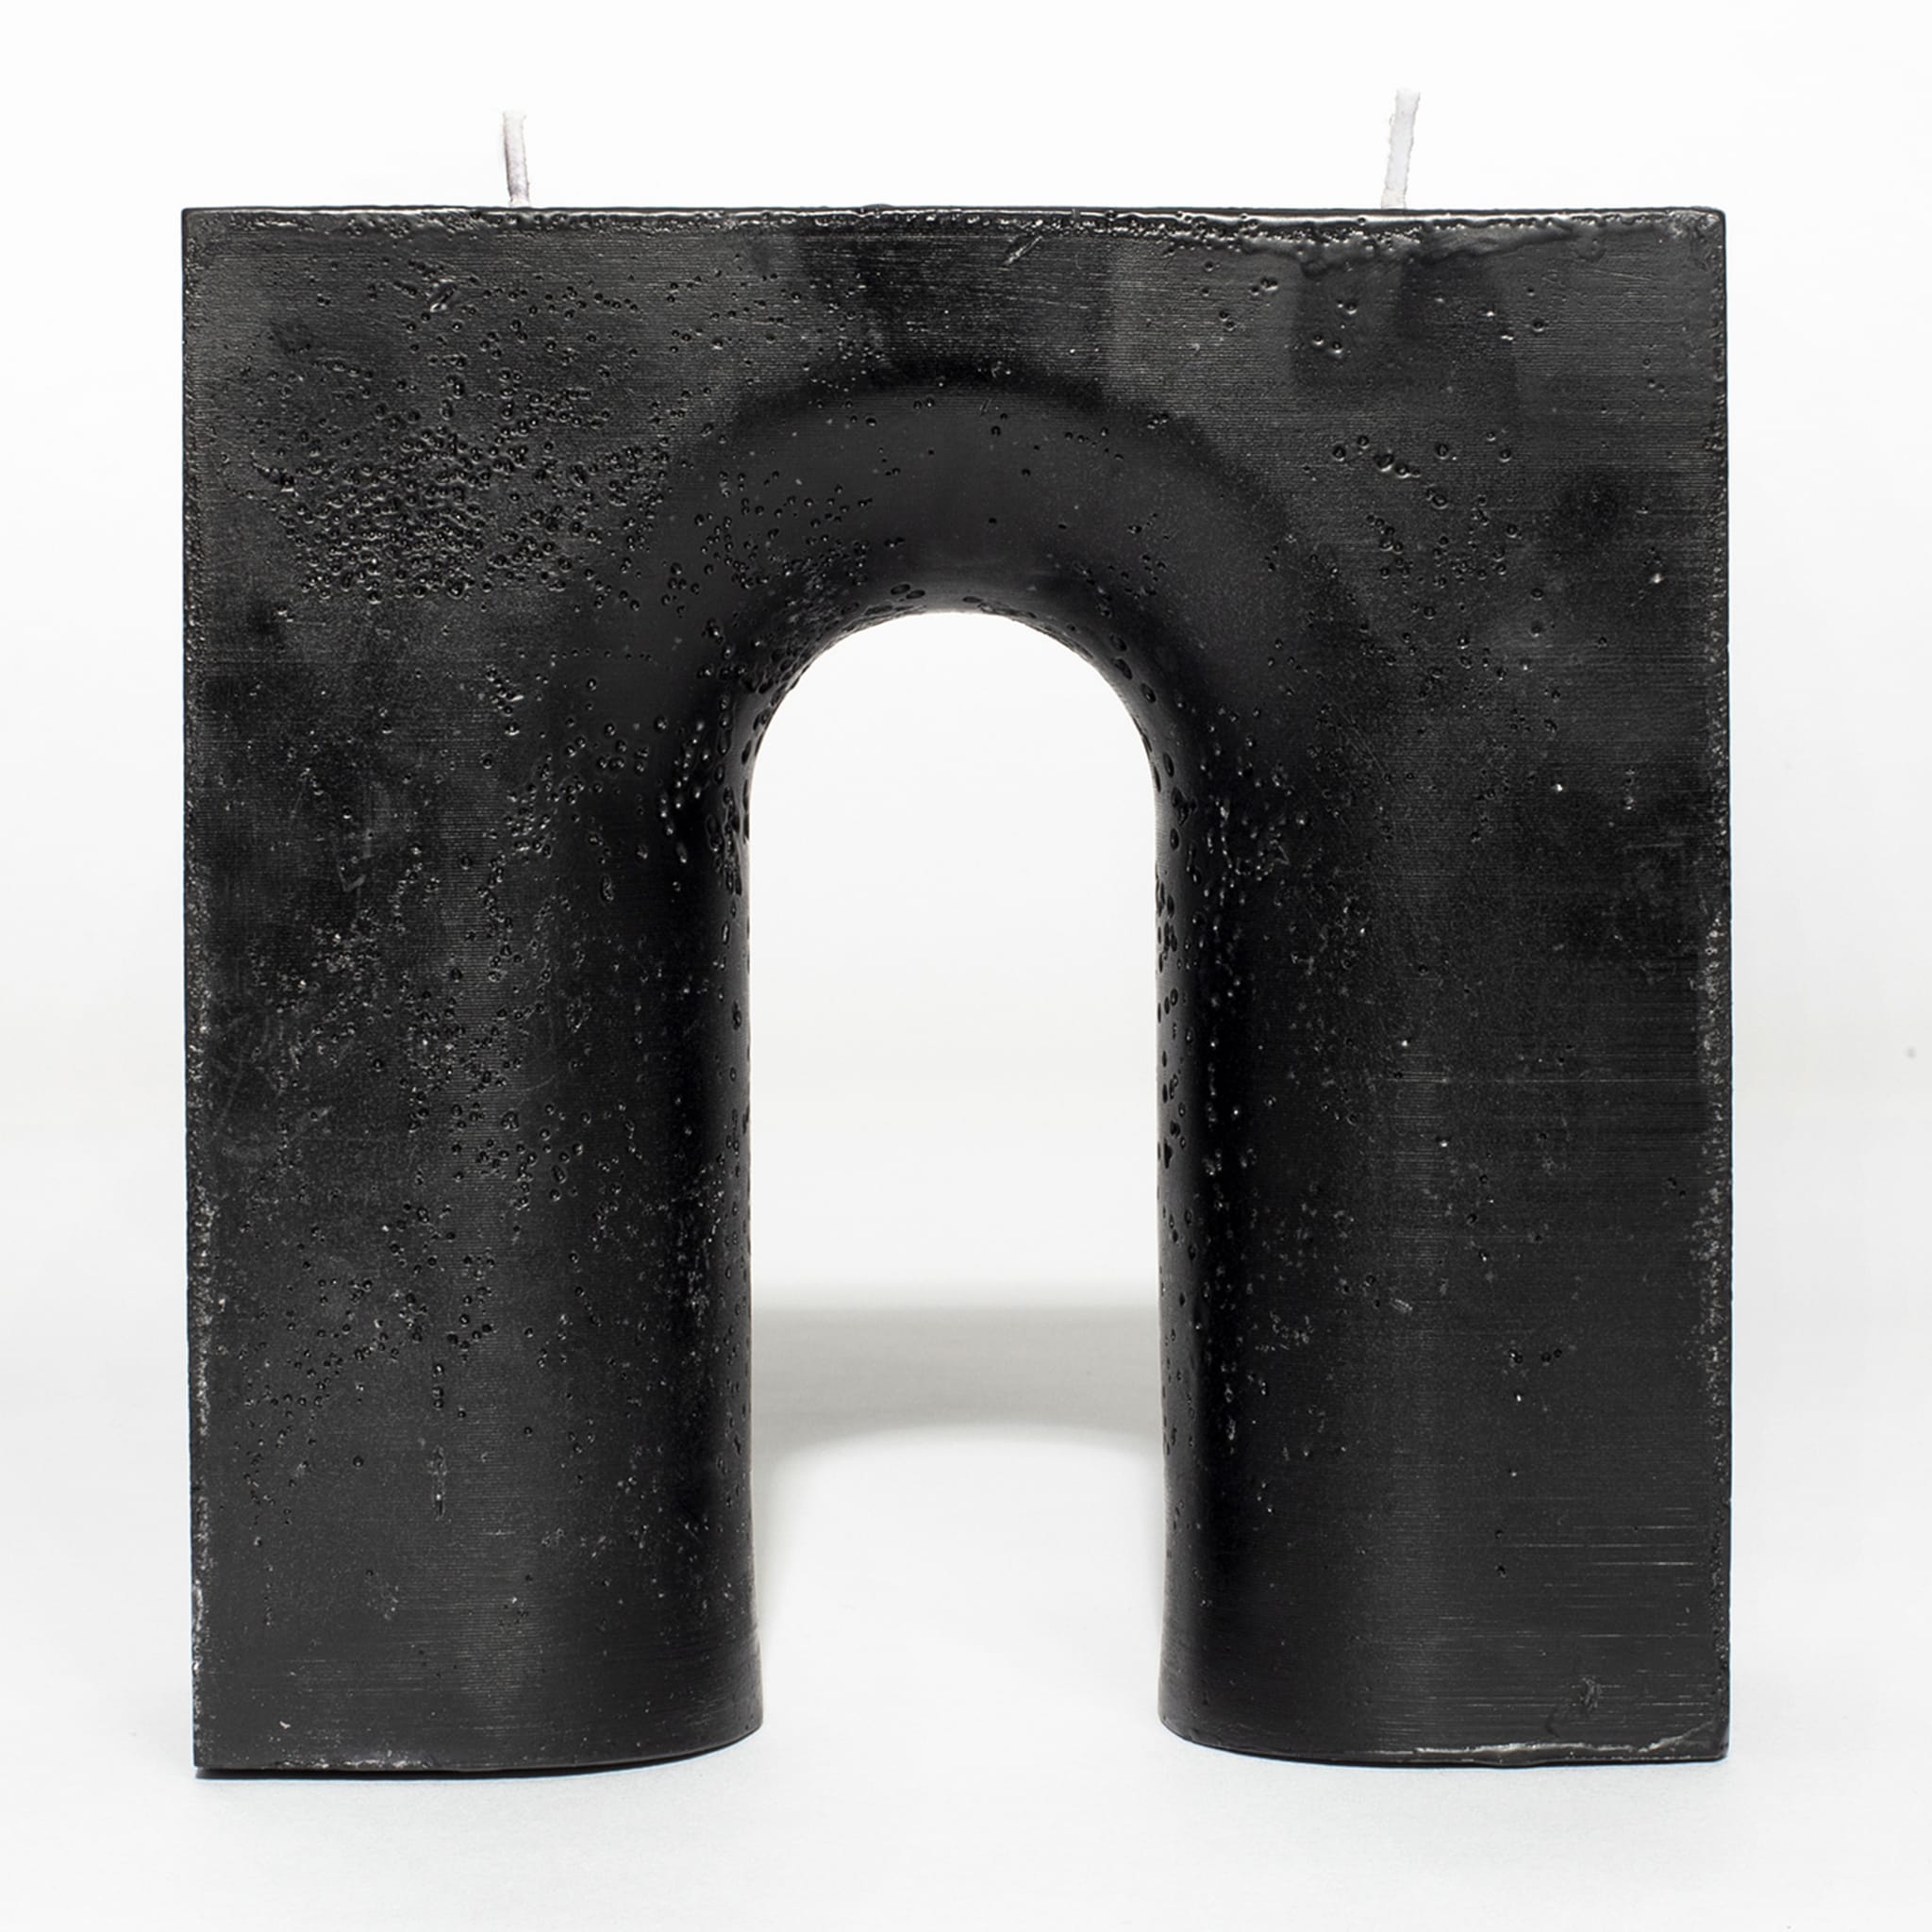 Trionfo Set of 2 Black Candles - Alternative view 5